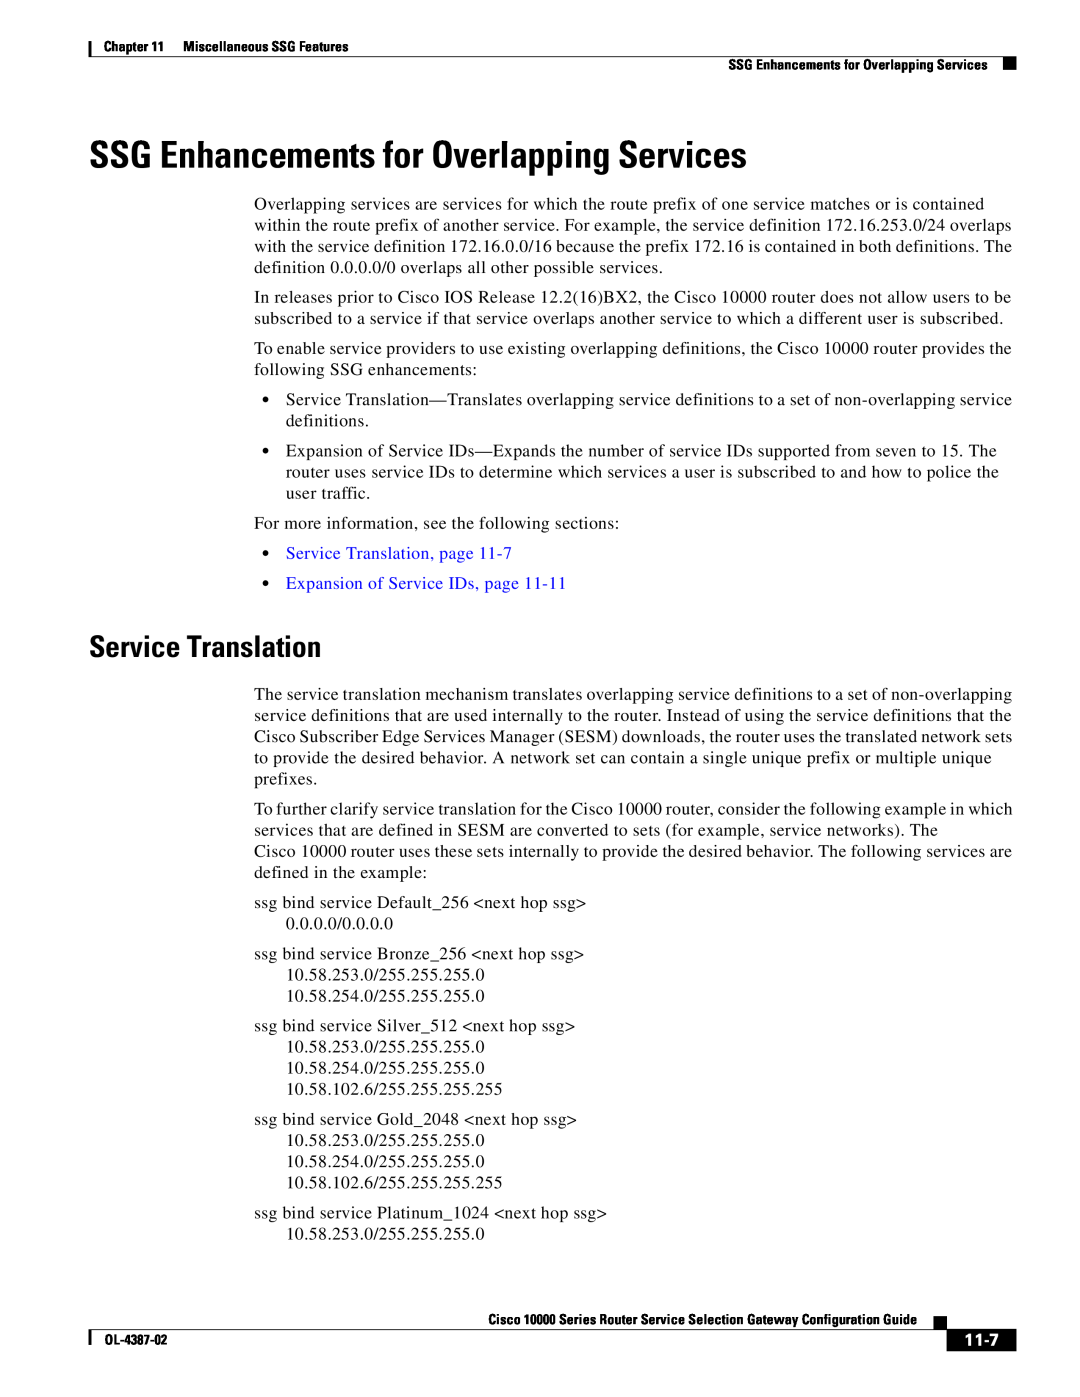 Cisco Systems OL-4387-02 manual SSG Enhancements for Overlapping Services, Service Translation, 11-7 